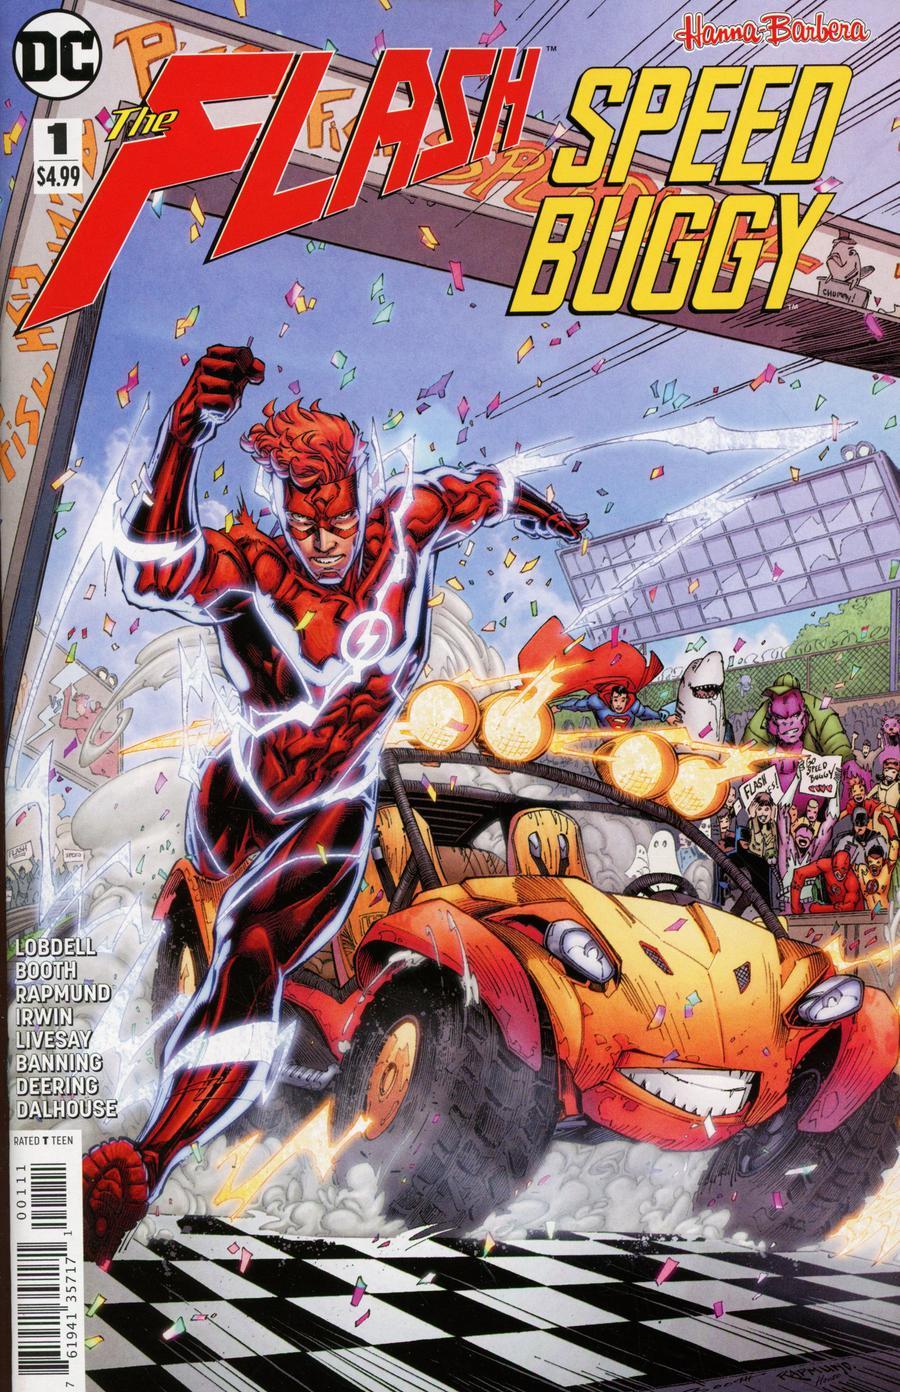 Flash Speed Buggy Special Vol. 1 #1